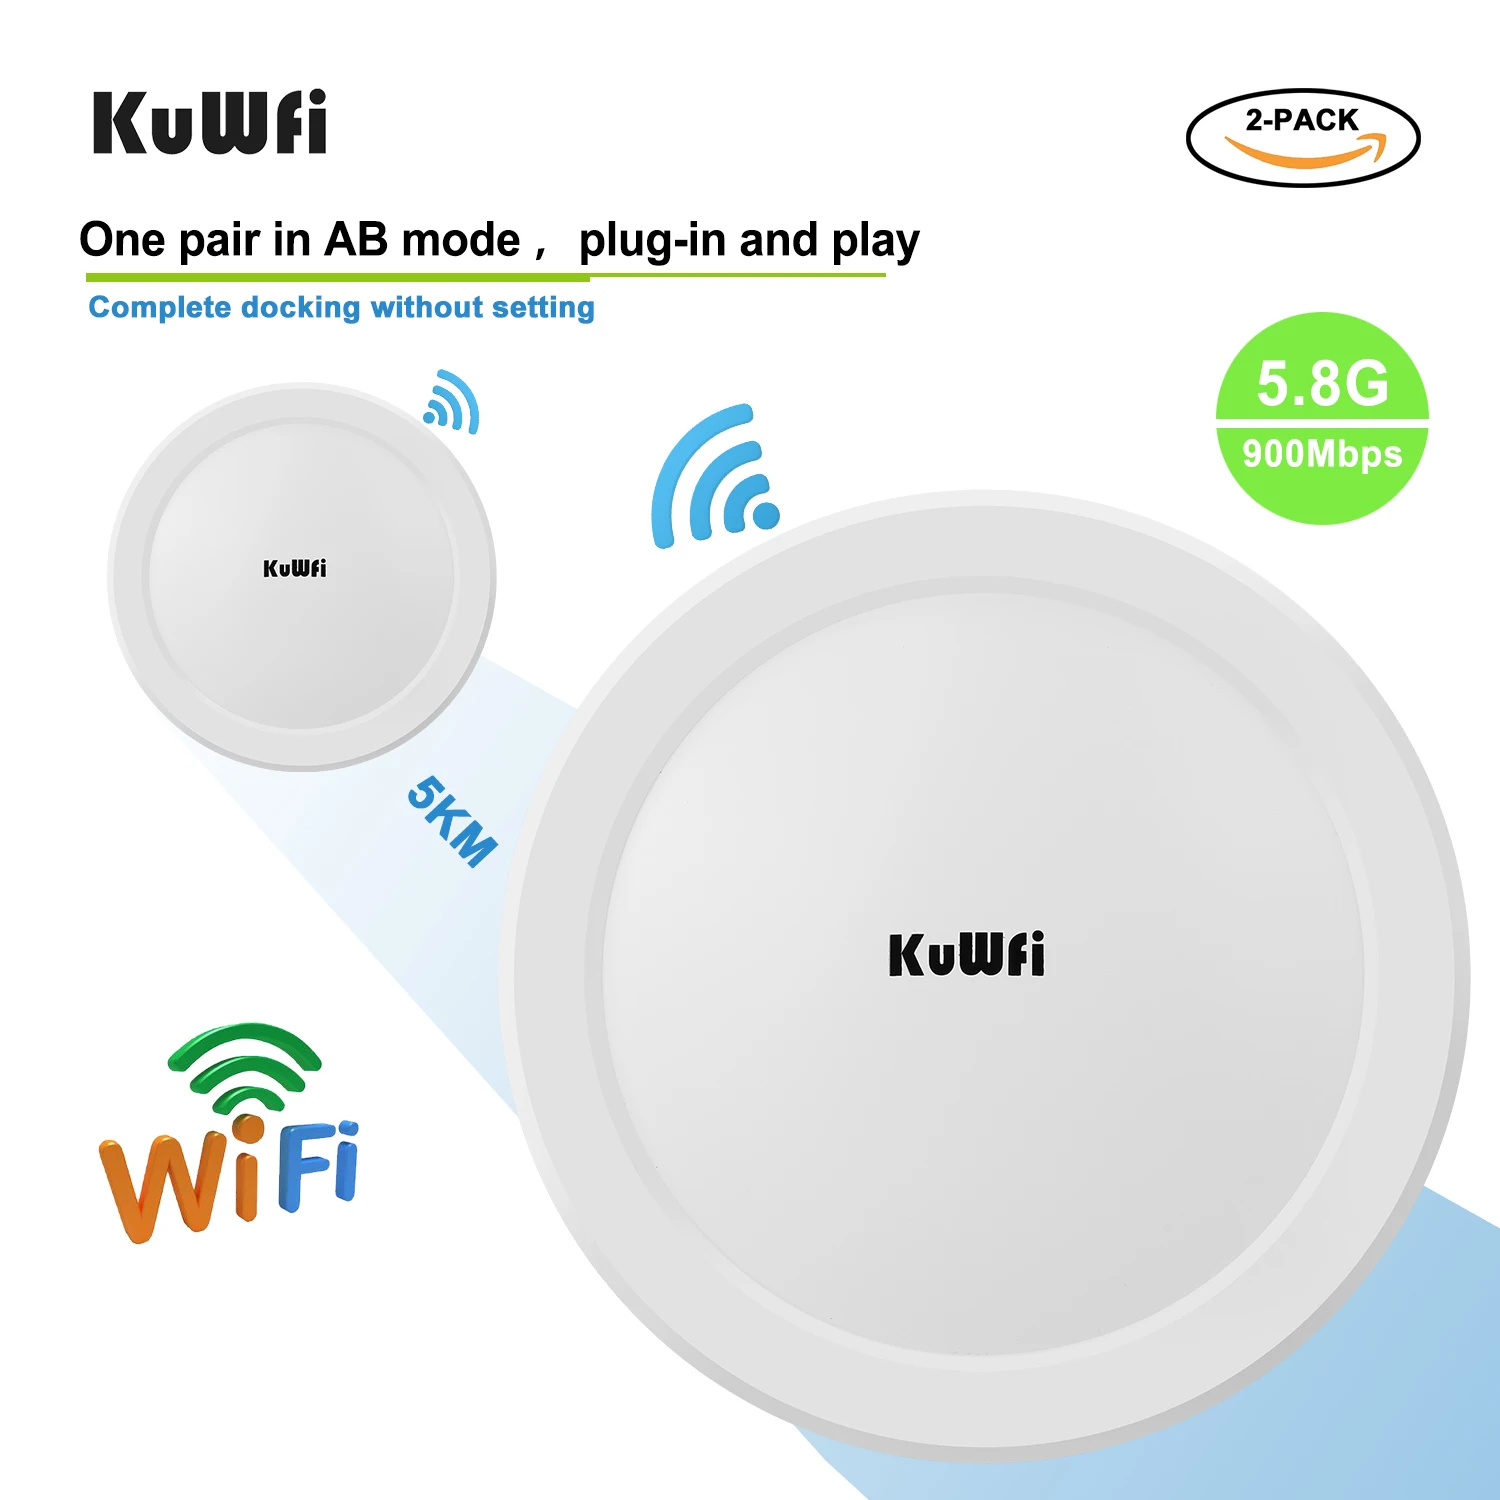 KuWFi Long-Range 11ac Outdoor Access Point/Wireless Bridge High Speeds & Optimal Bandwidth at Extended Point-to-Point Ranges whole house wifi signal booster